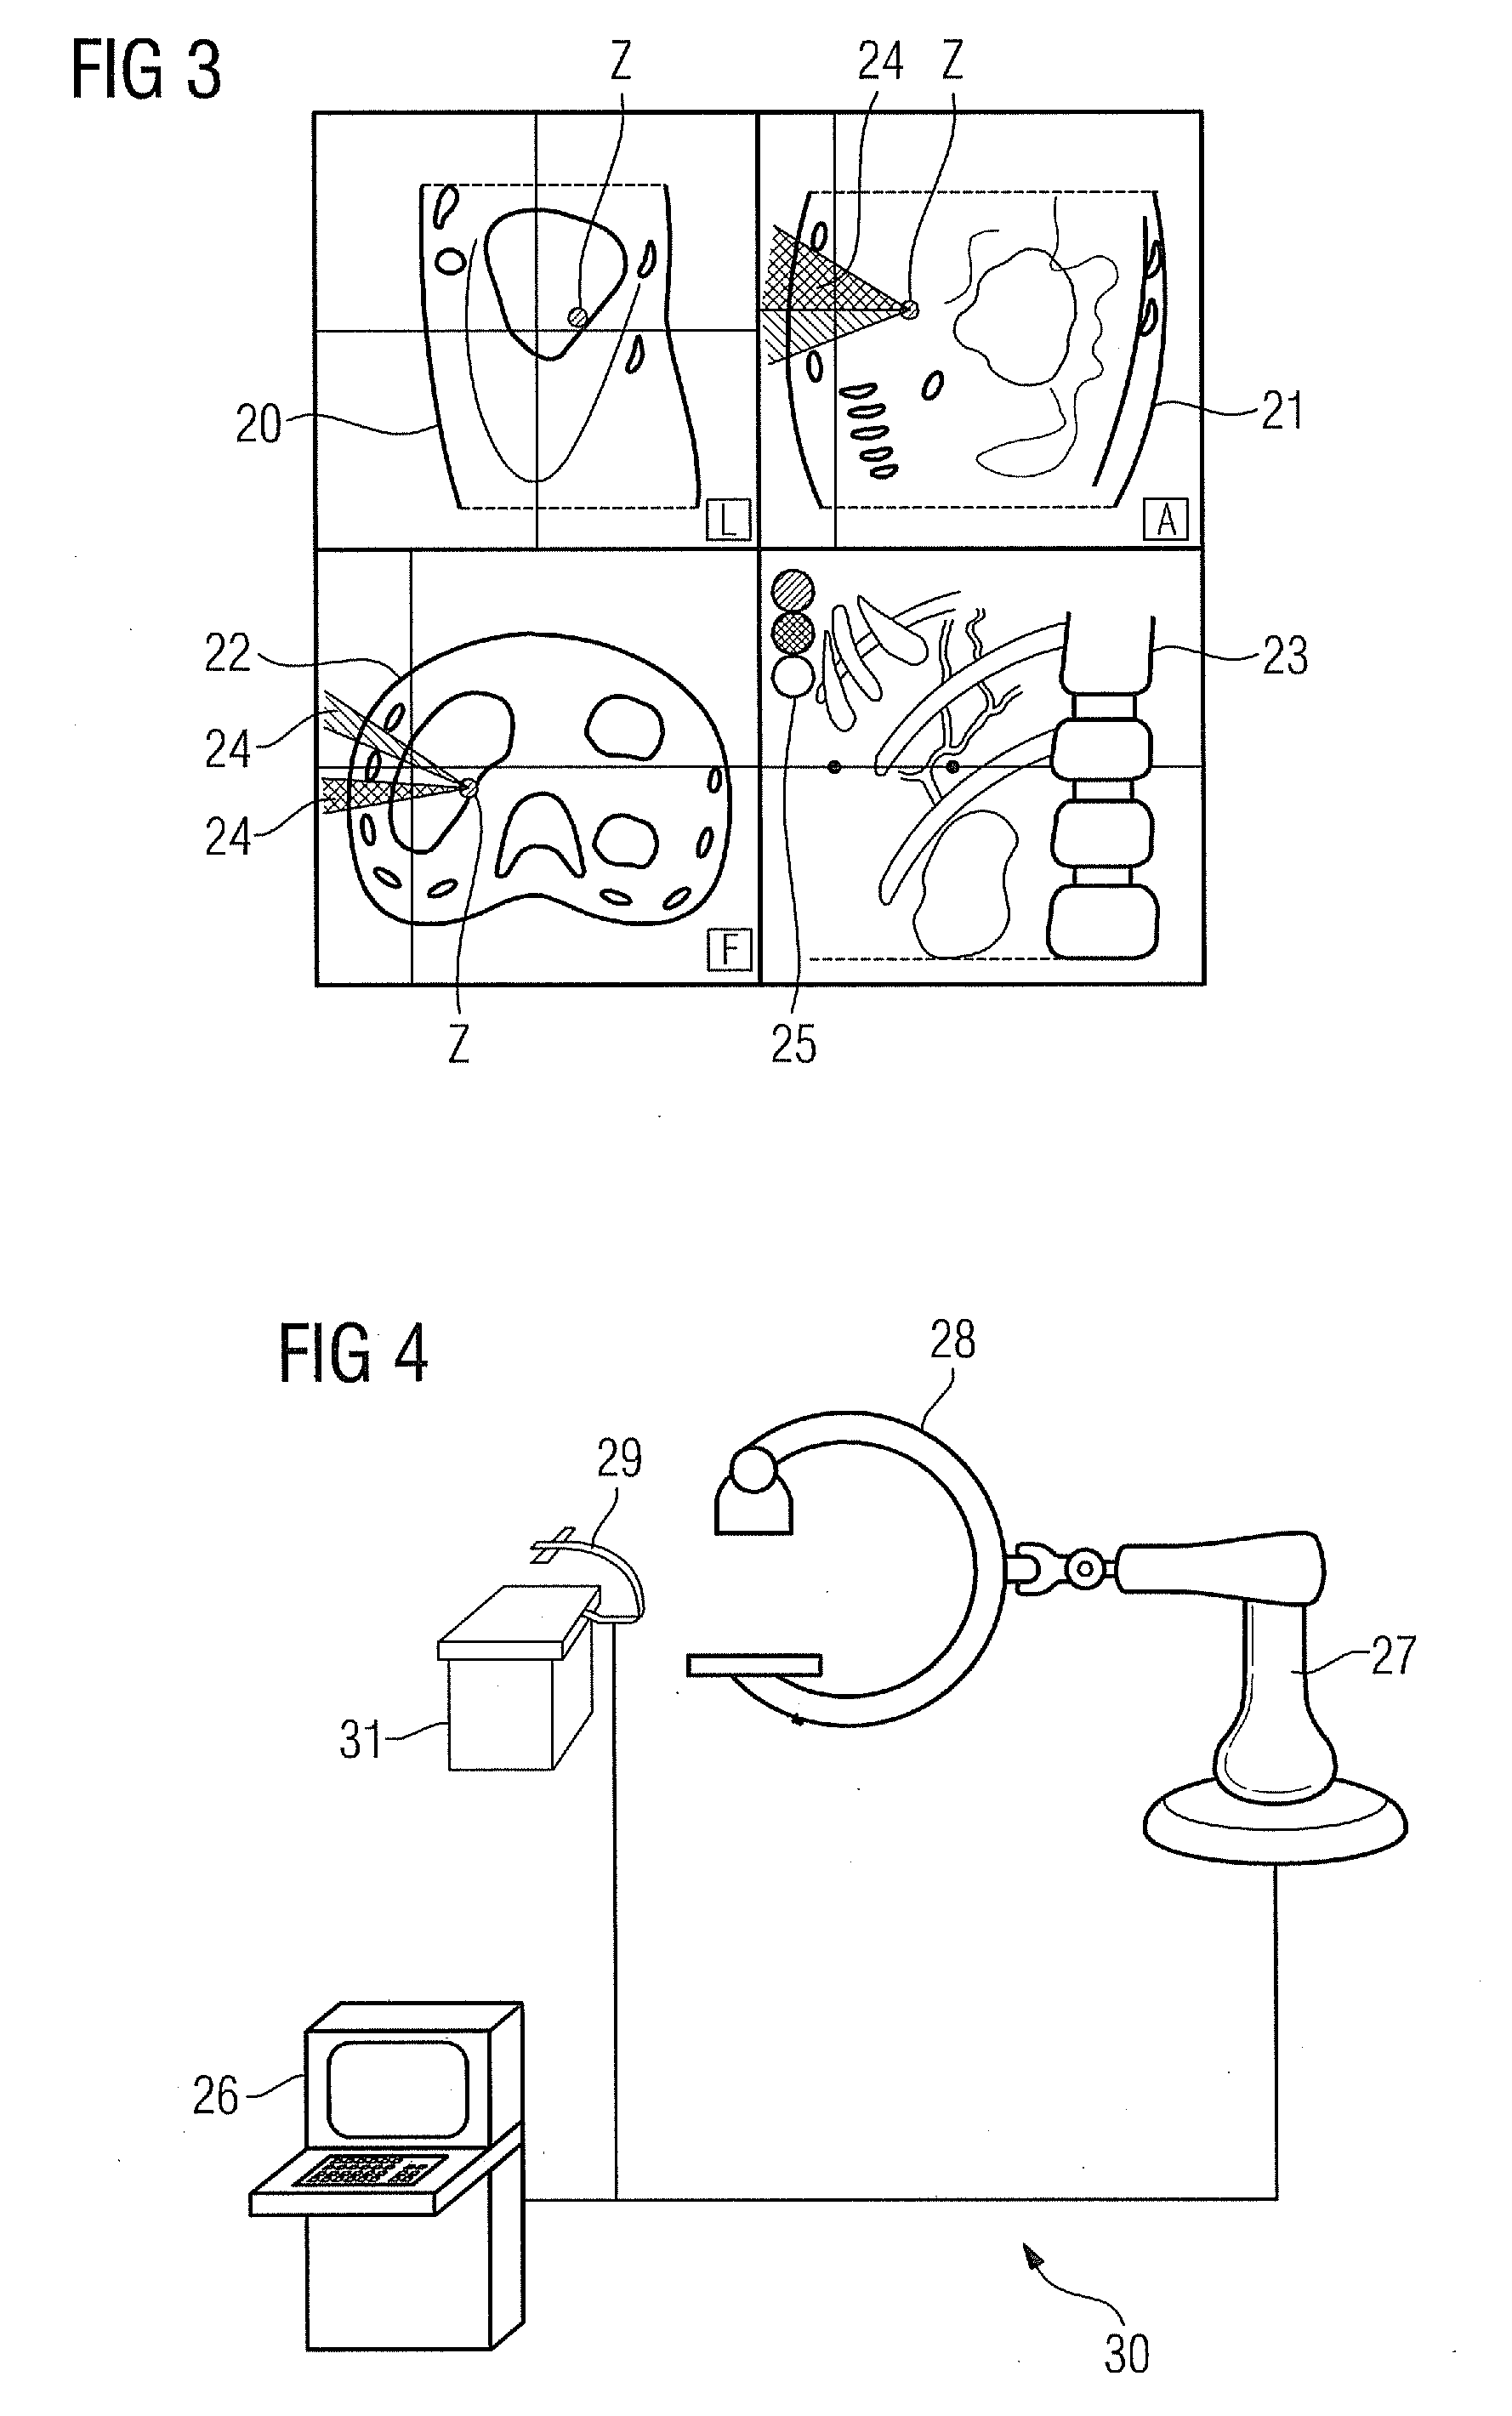 Method for Supporting Puncture Planning in a Puncture of an Examination Object